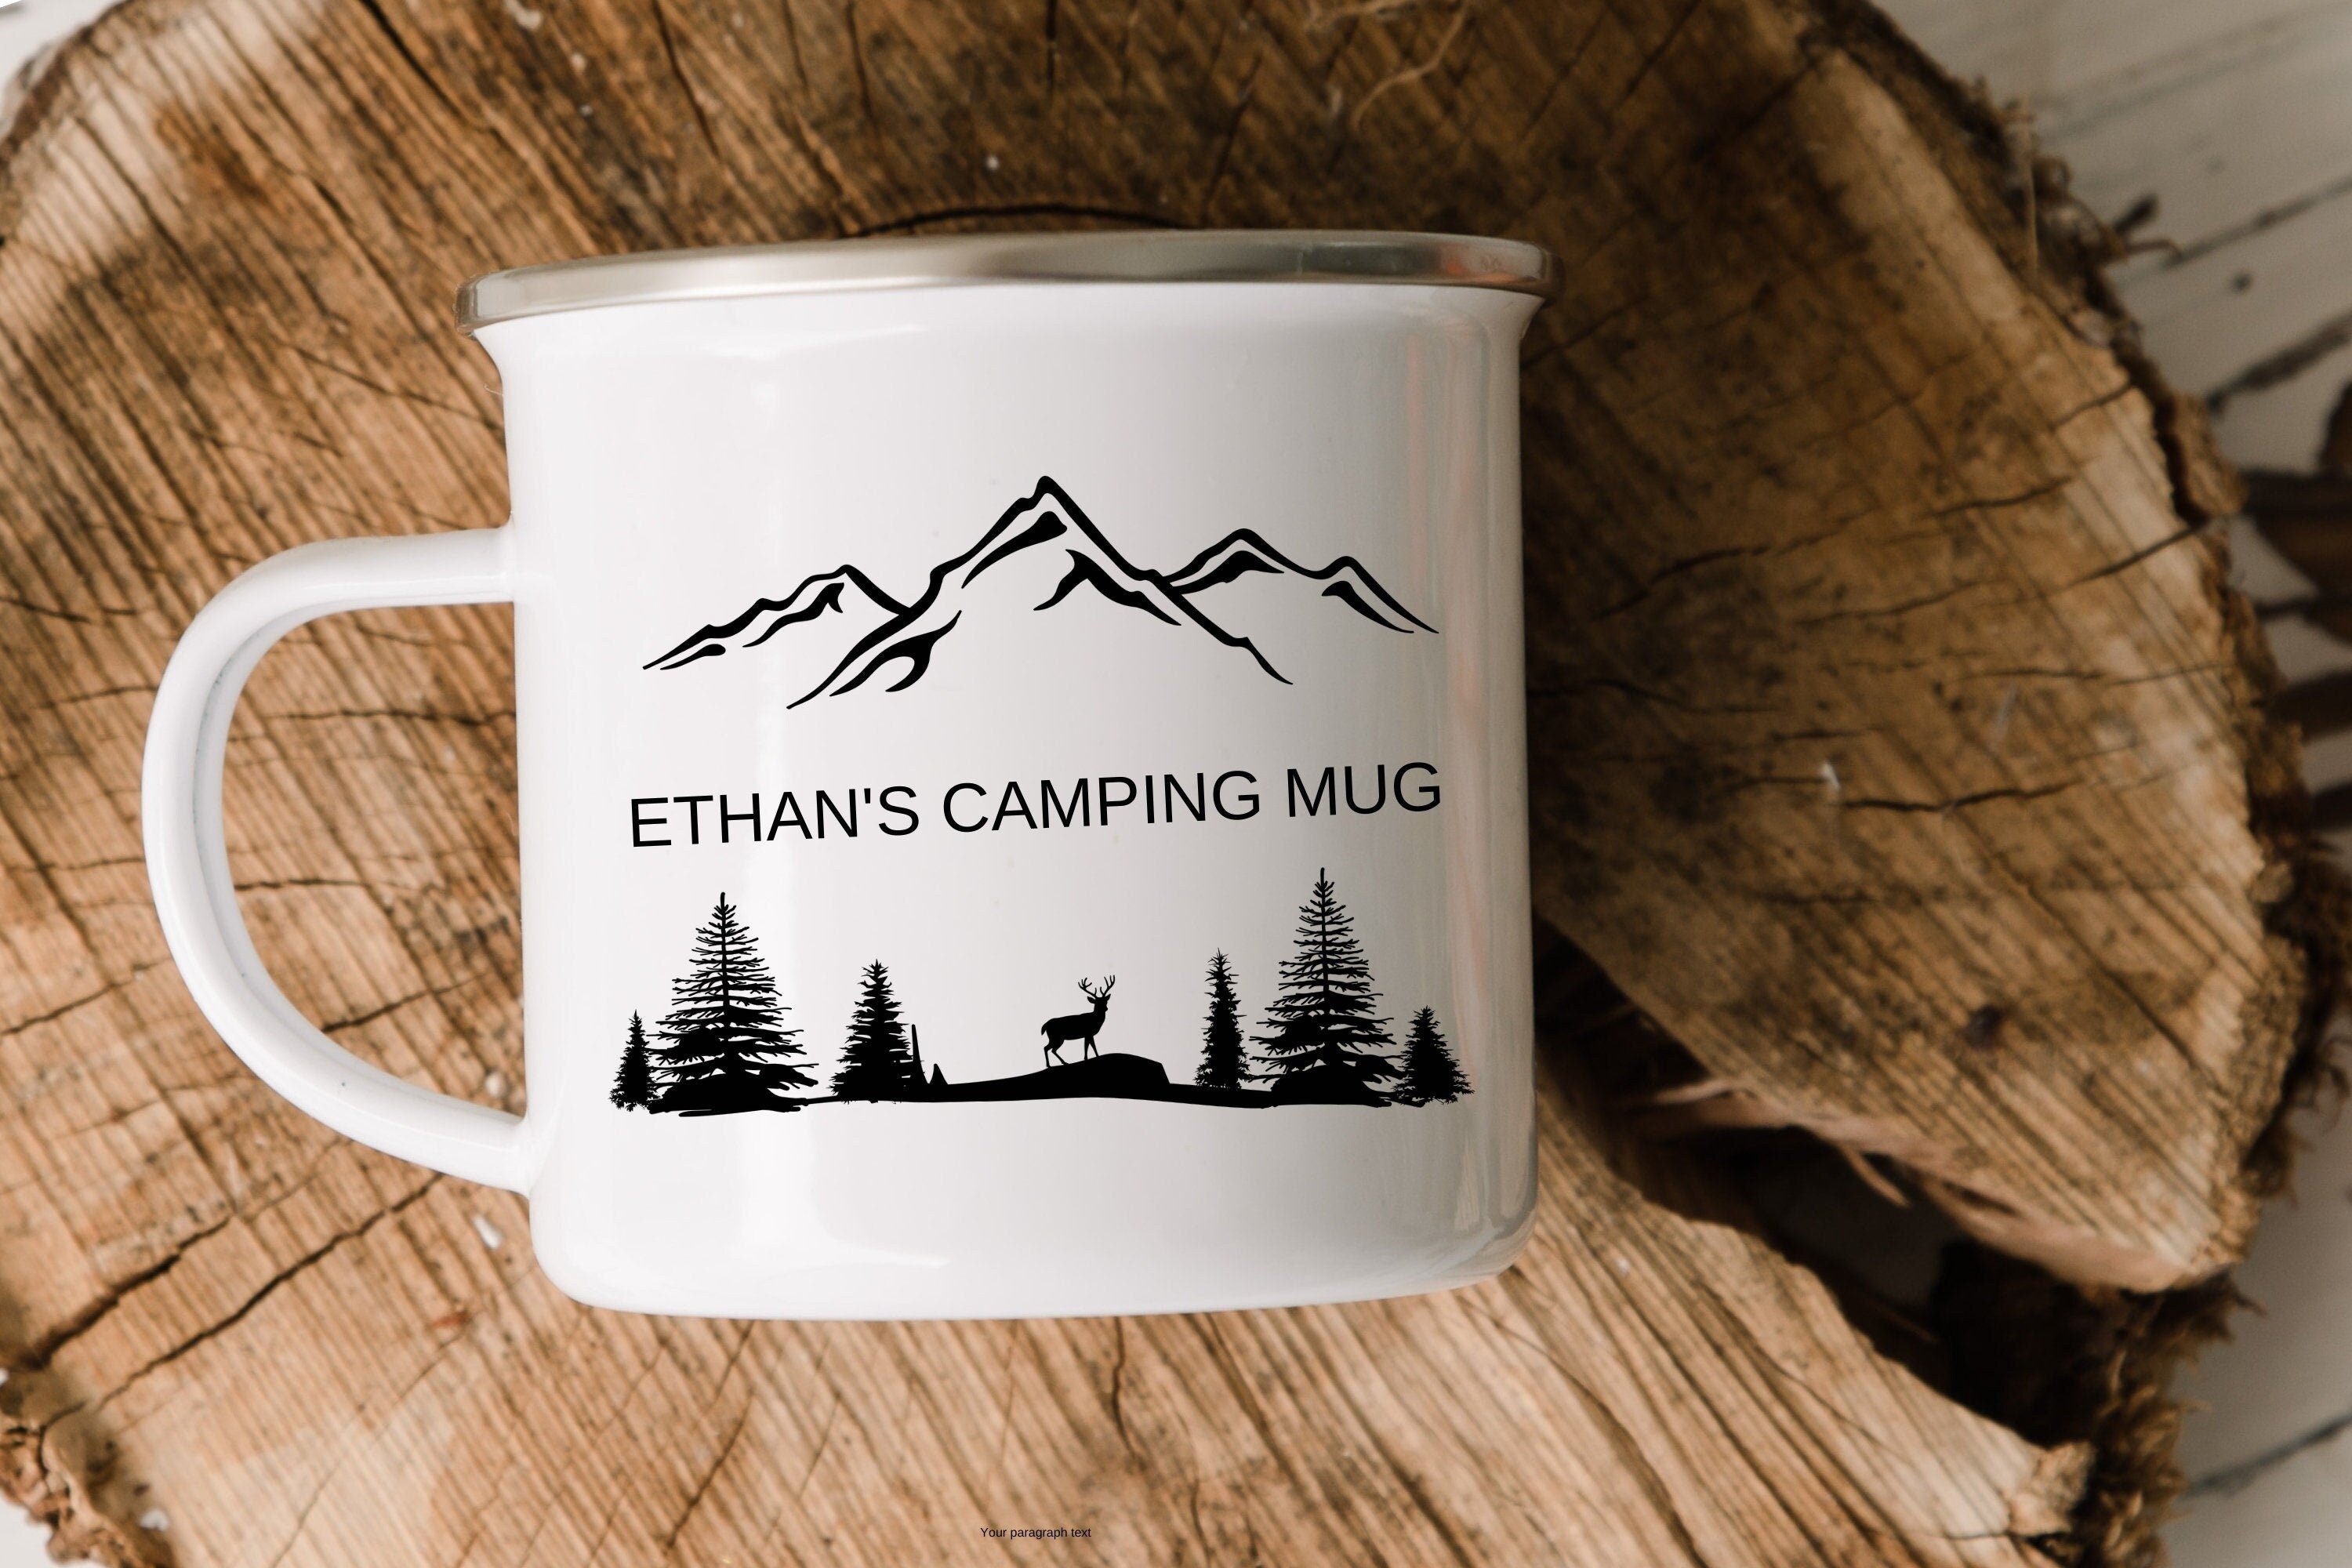 We Out Here Camping Coffee Mugs